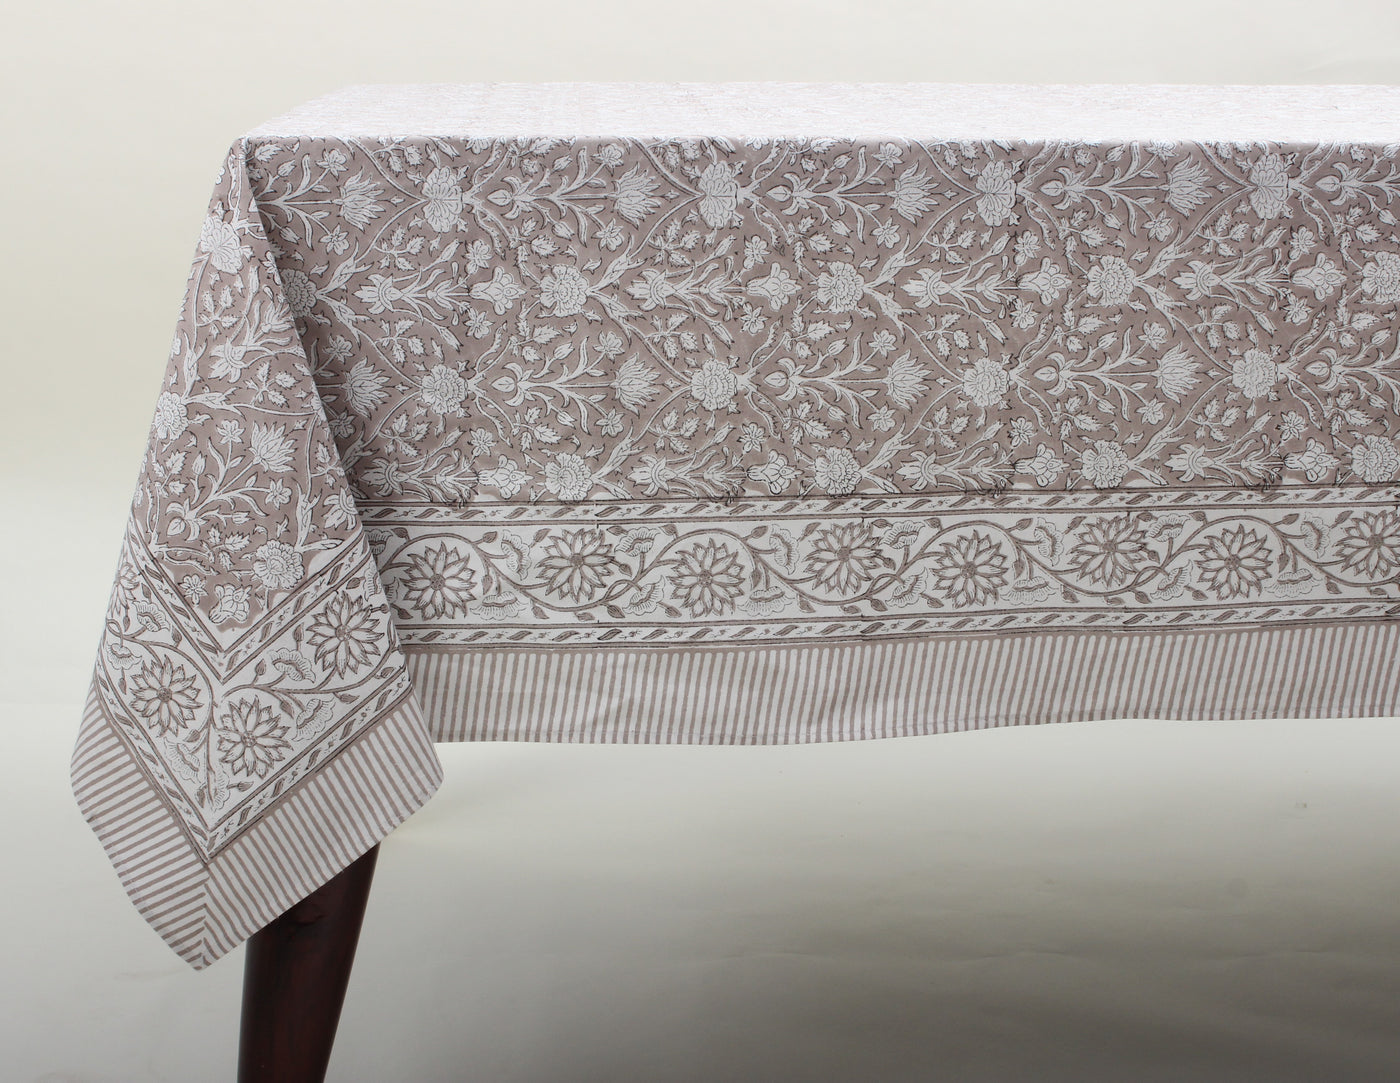 Fabricrush Taupe and Off White Indian Hand Block Floral Printed Pure Cotton Cloth Tablecloth, Farmhouse Housewarming Wedding Restaurant Party Home Fall